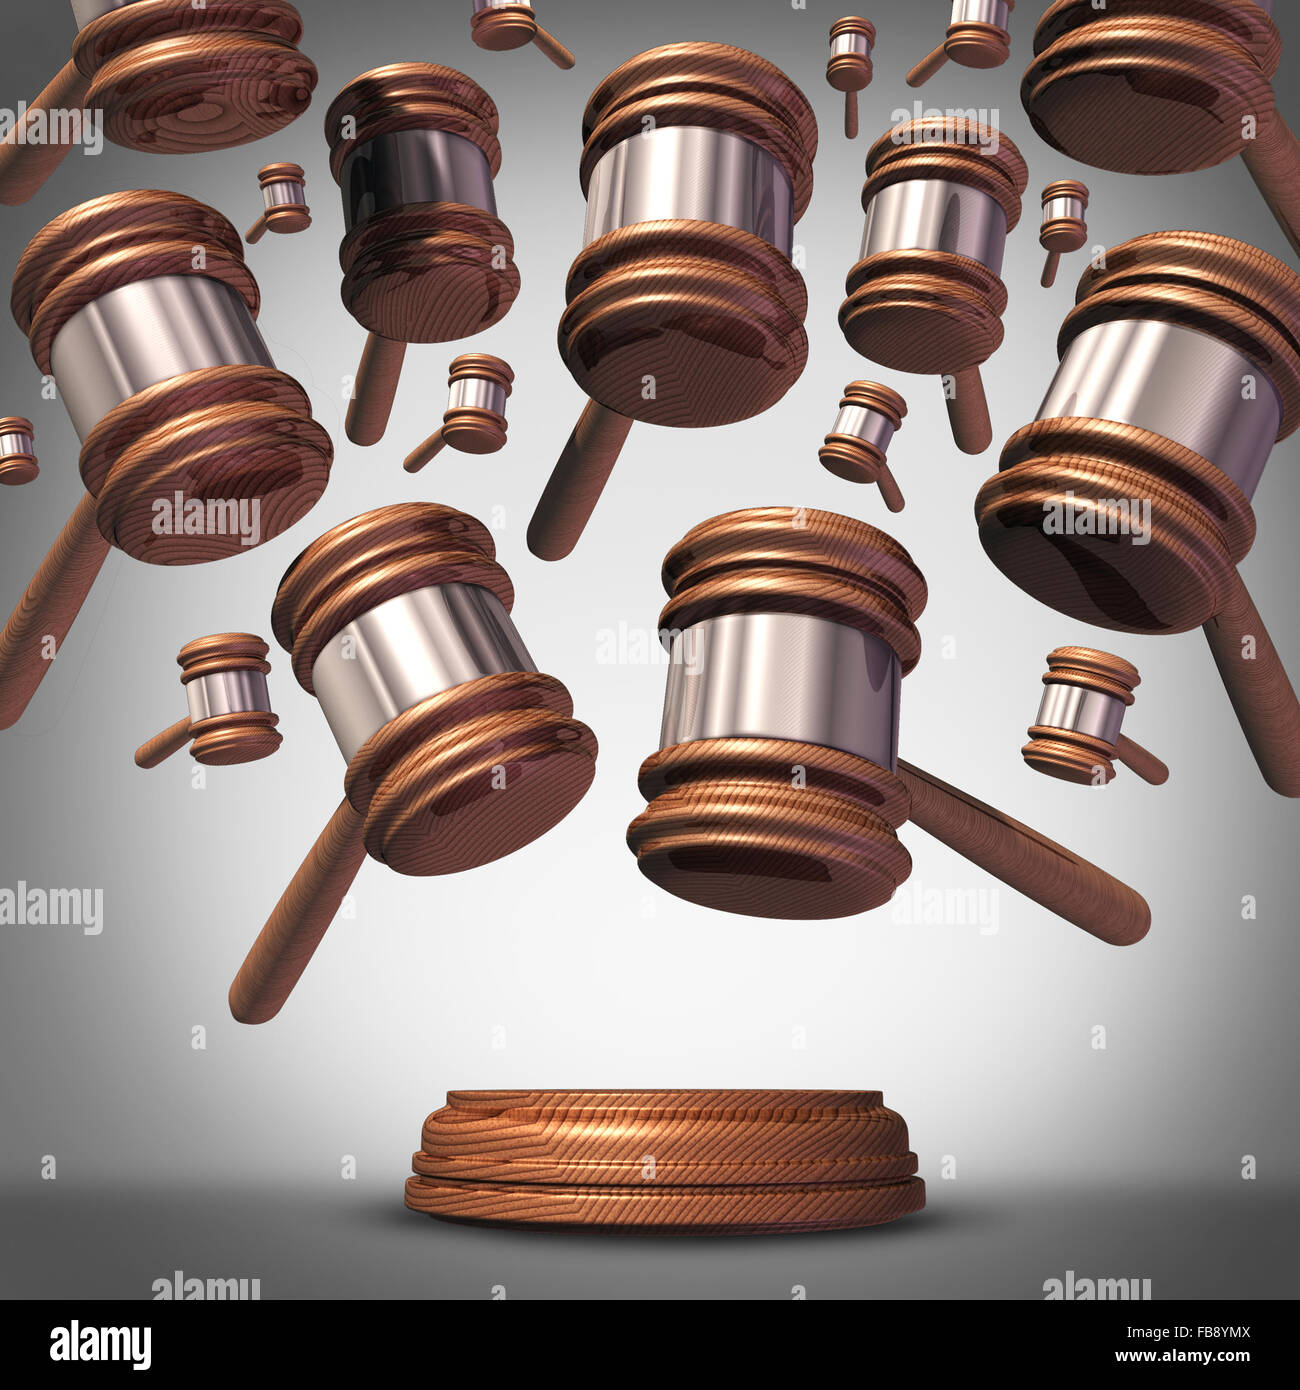 Class action lawsuit concept as a plaintiff group represented by many judge mallets or gavel icons coming down as a symbol for social litigation or organized legal legislation. Stock Photo